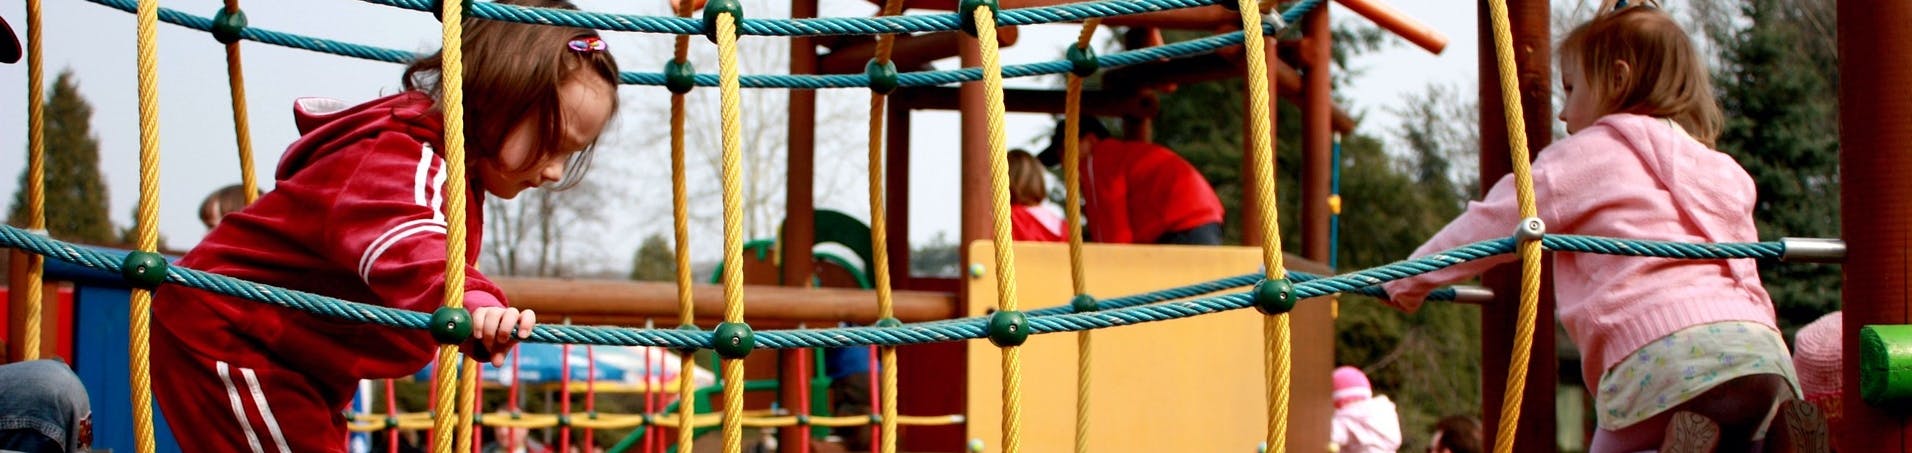 image of children playing at a playground